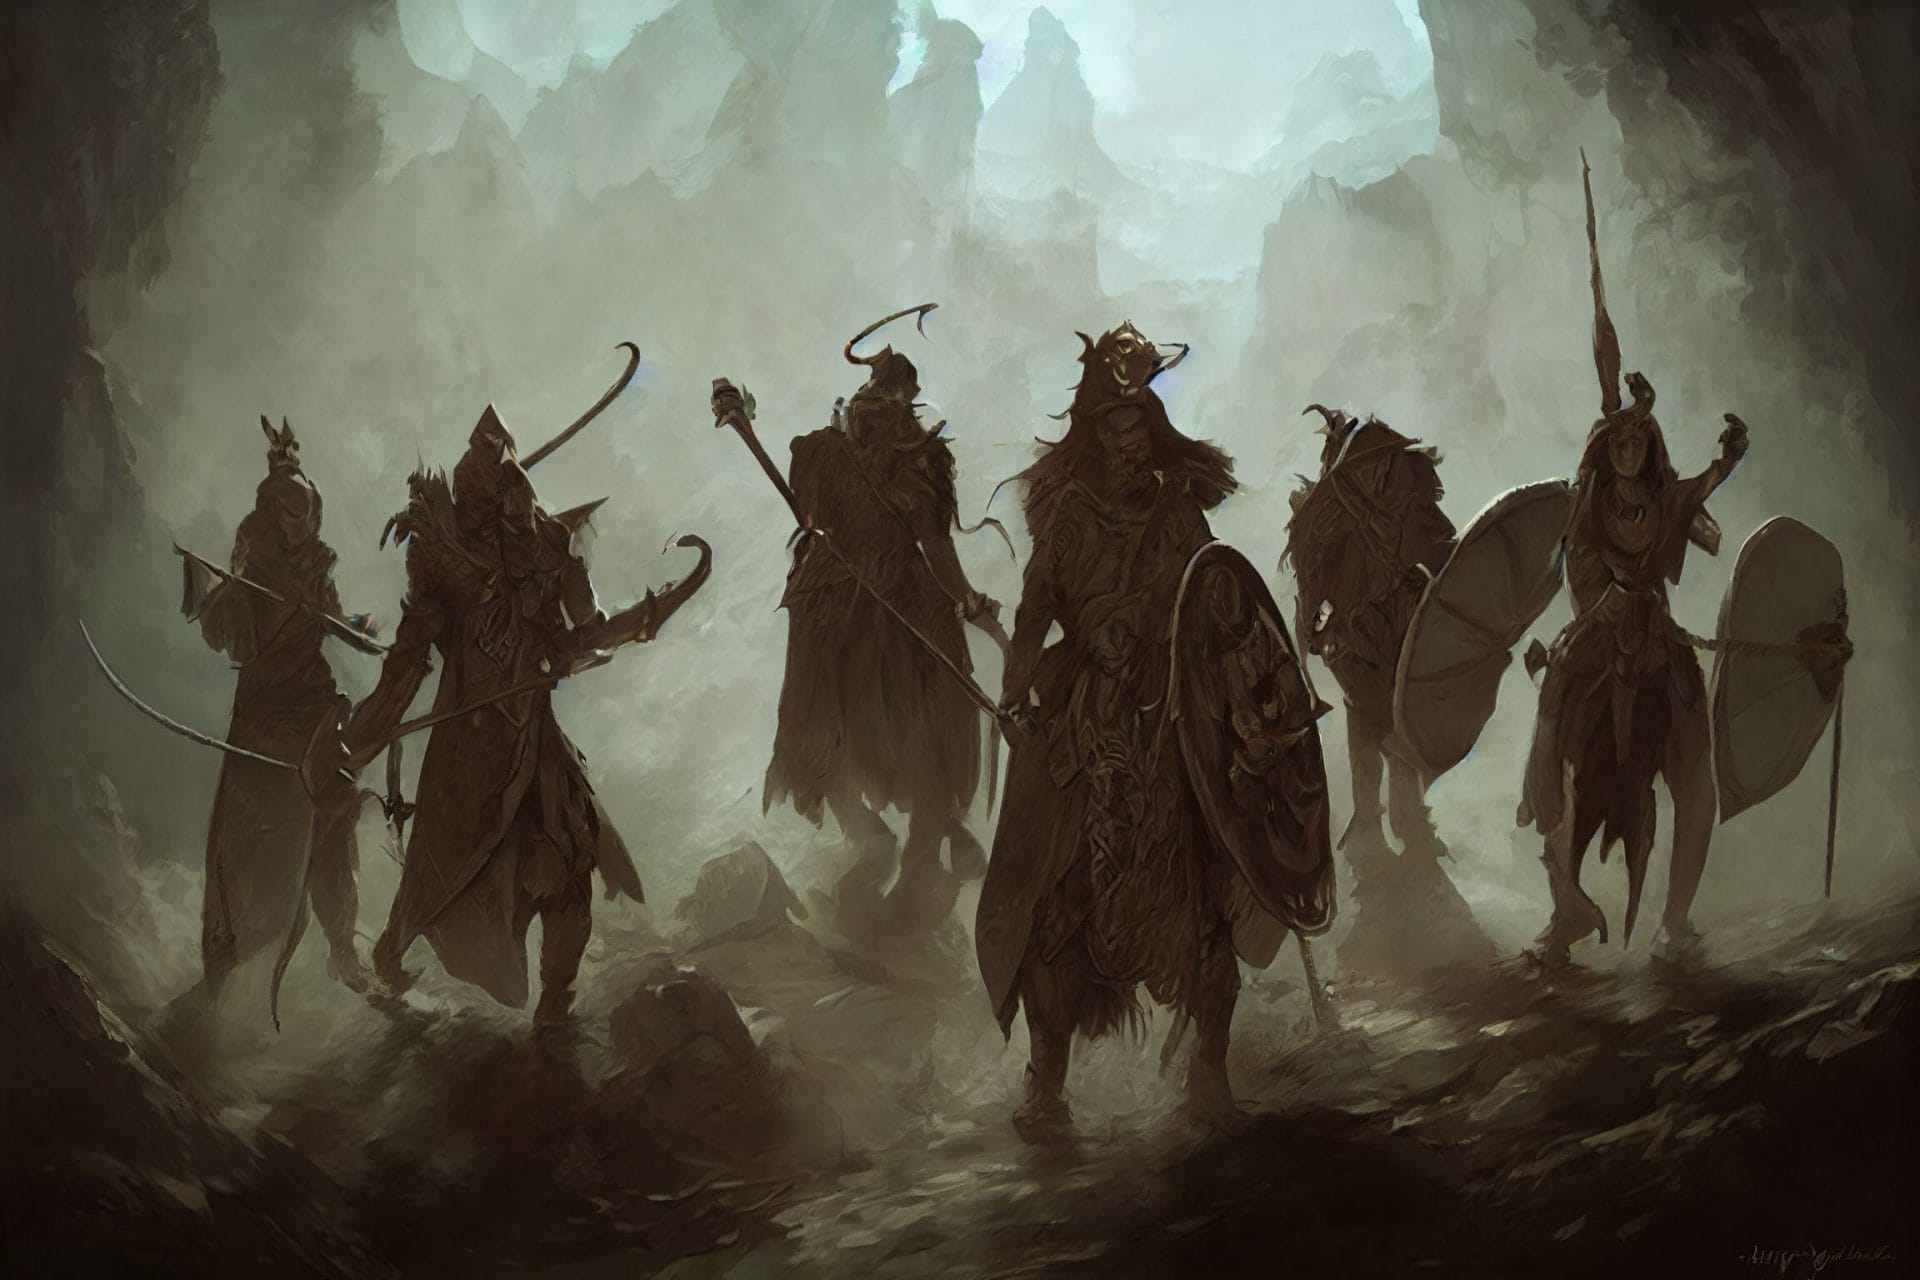 Shadowy figures with weapons and shields gathering